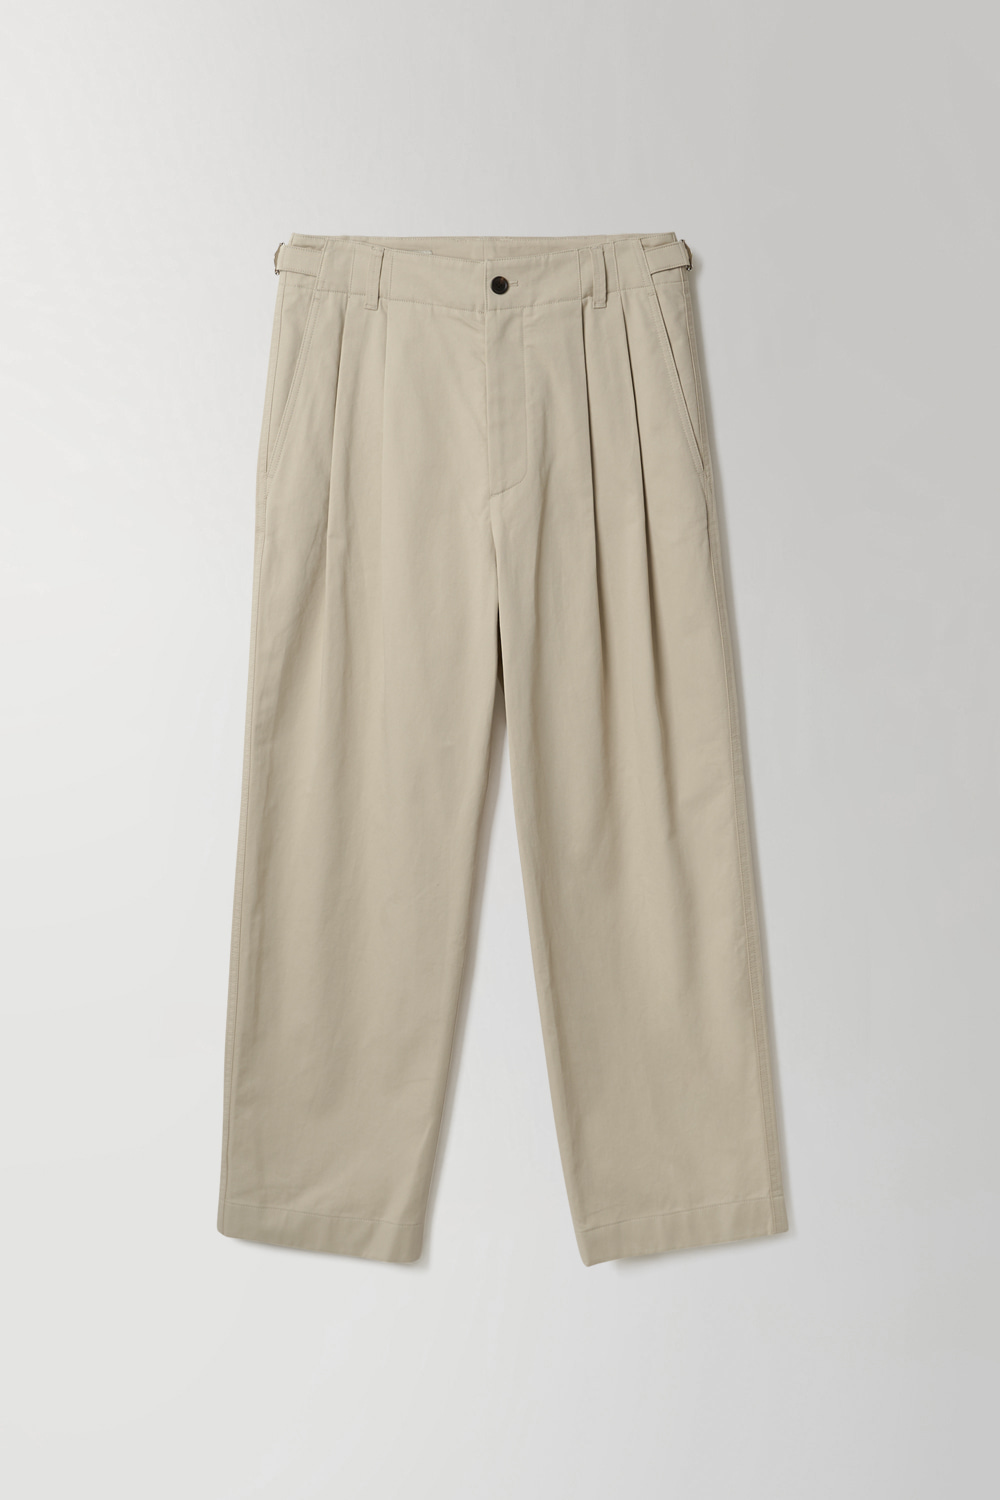 [2ND] 22AW TRAVELLER CHINO PANTS - SAND BEIGE